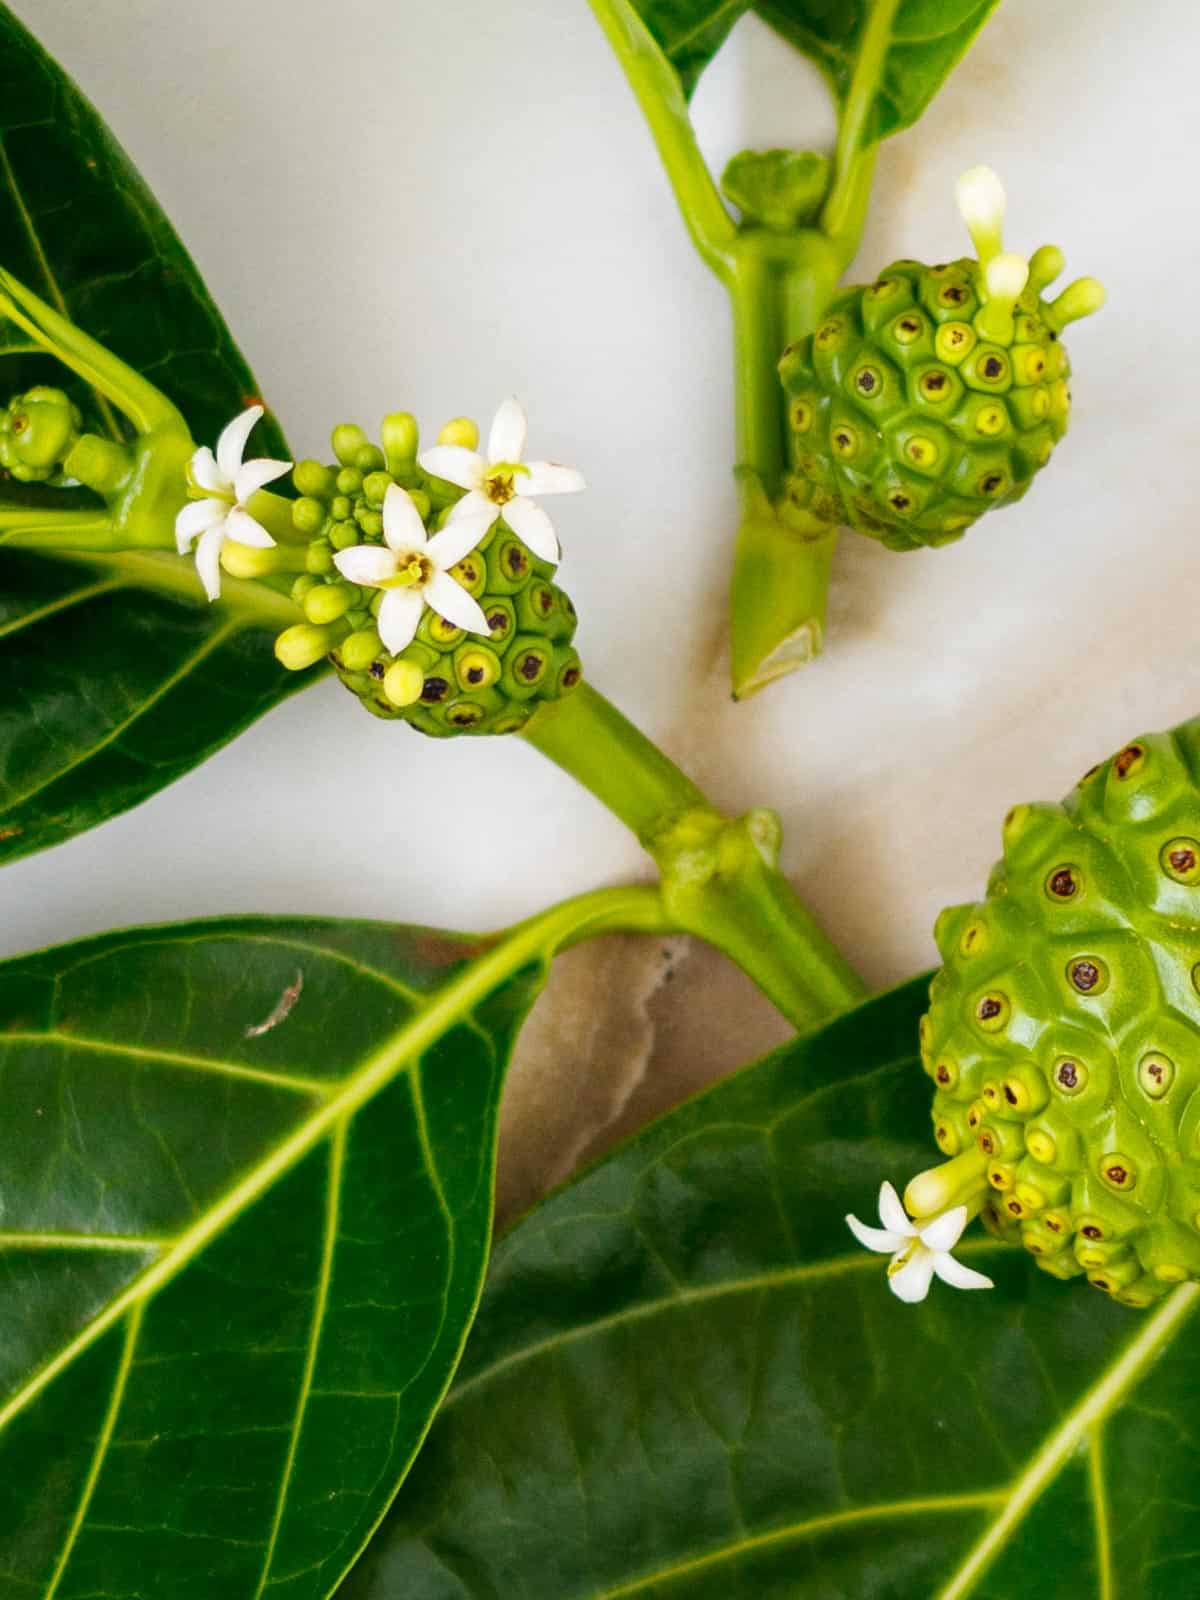 Noni flowers protrude from fruit.